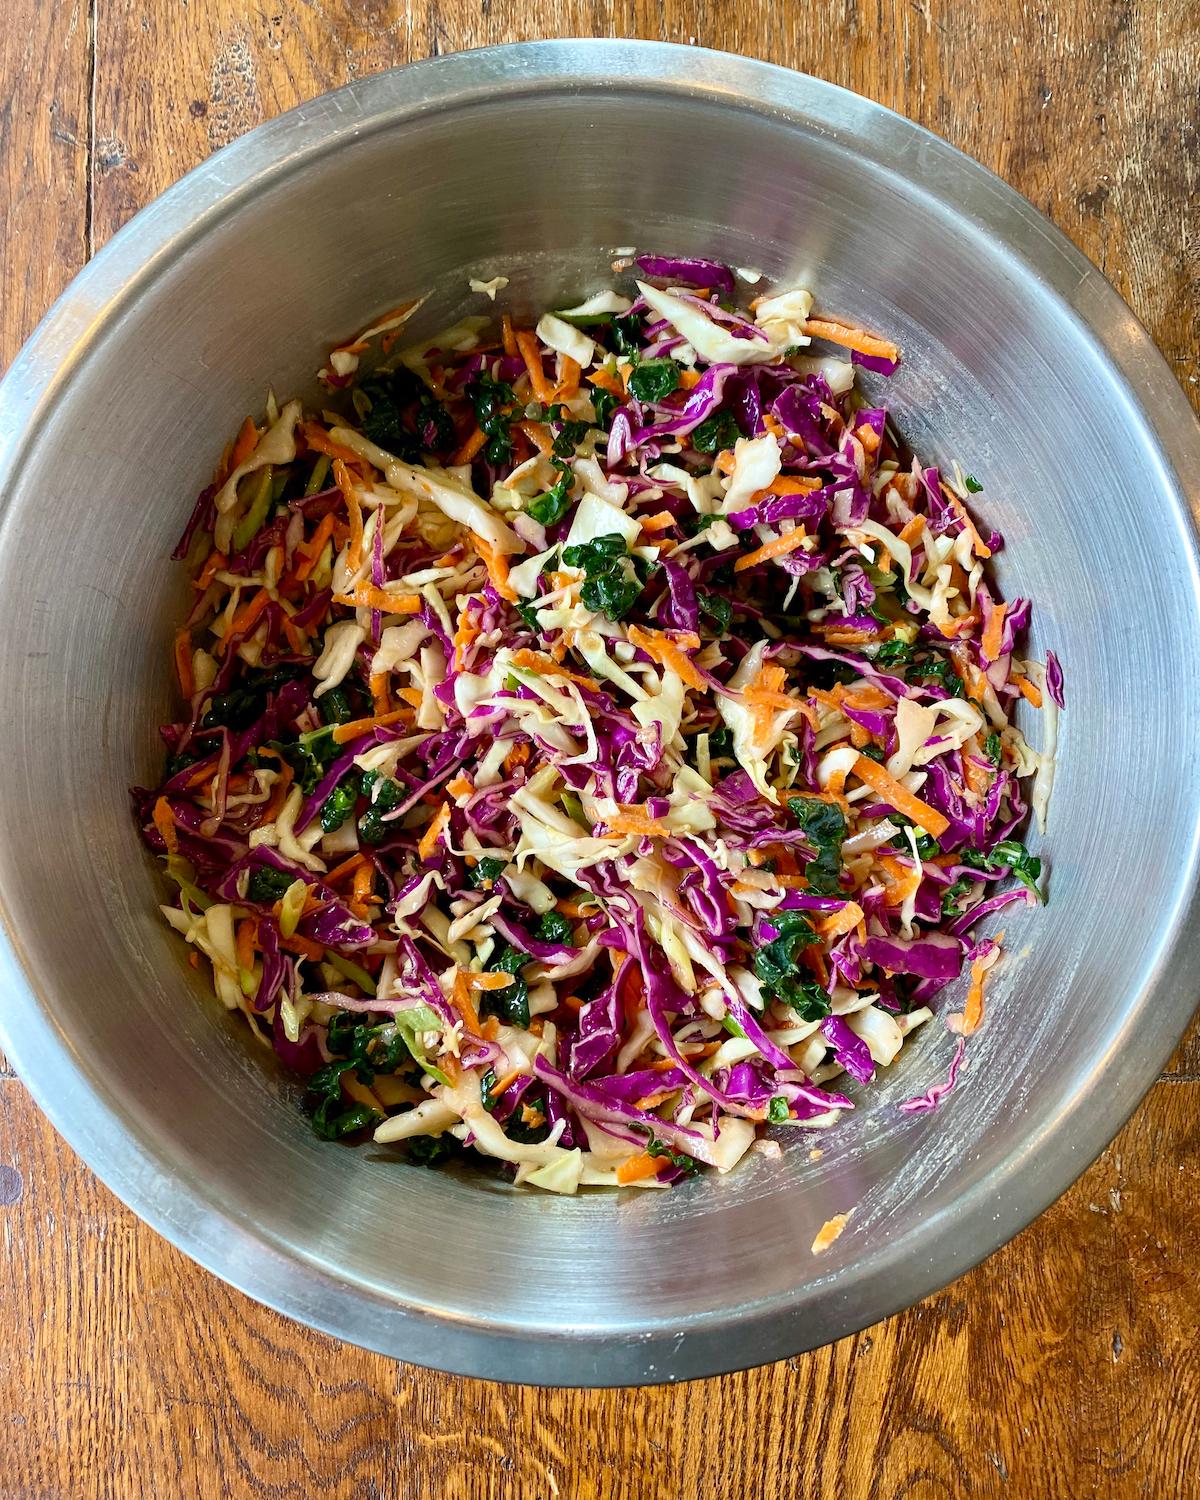 An Unexpected Ingredient Makes a Simple Slaw Shine